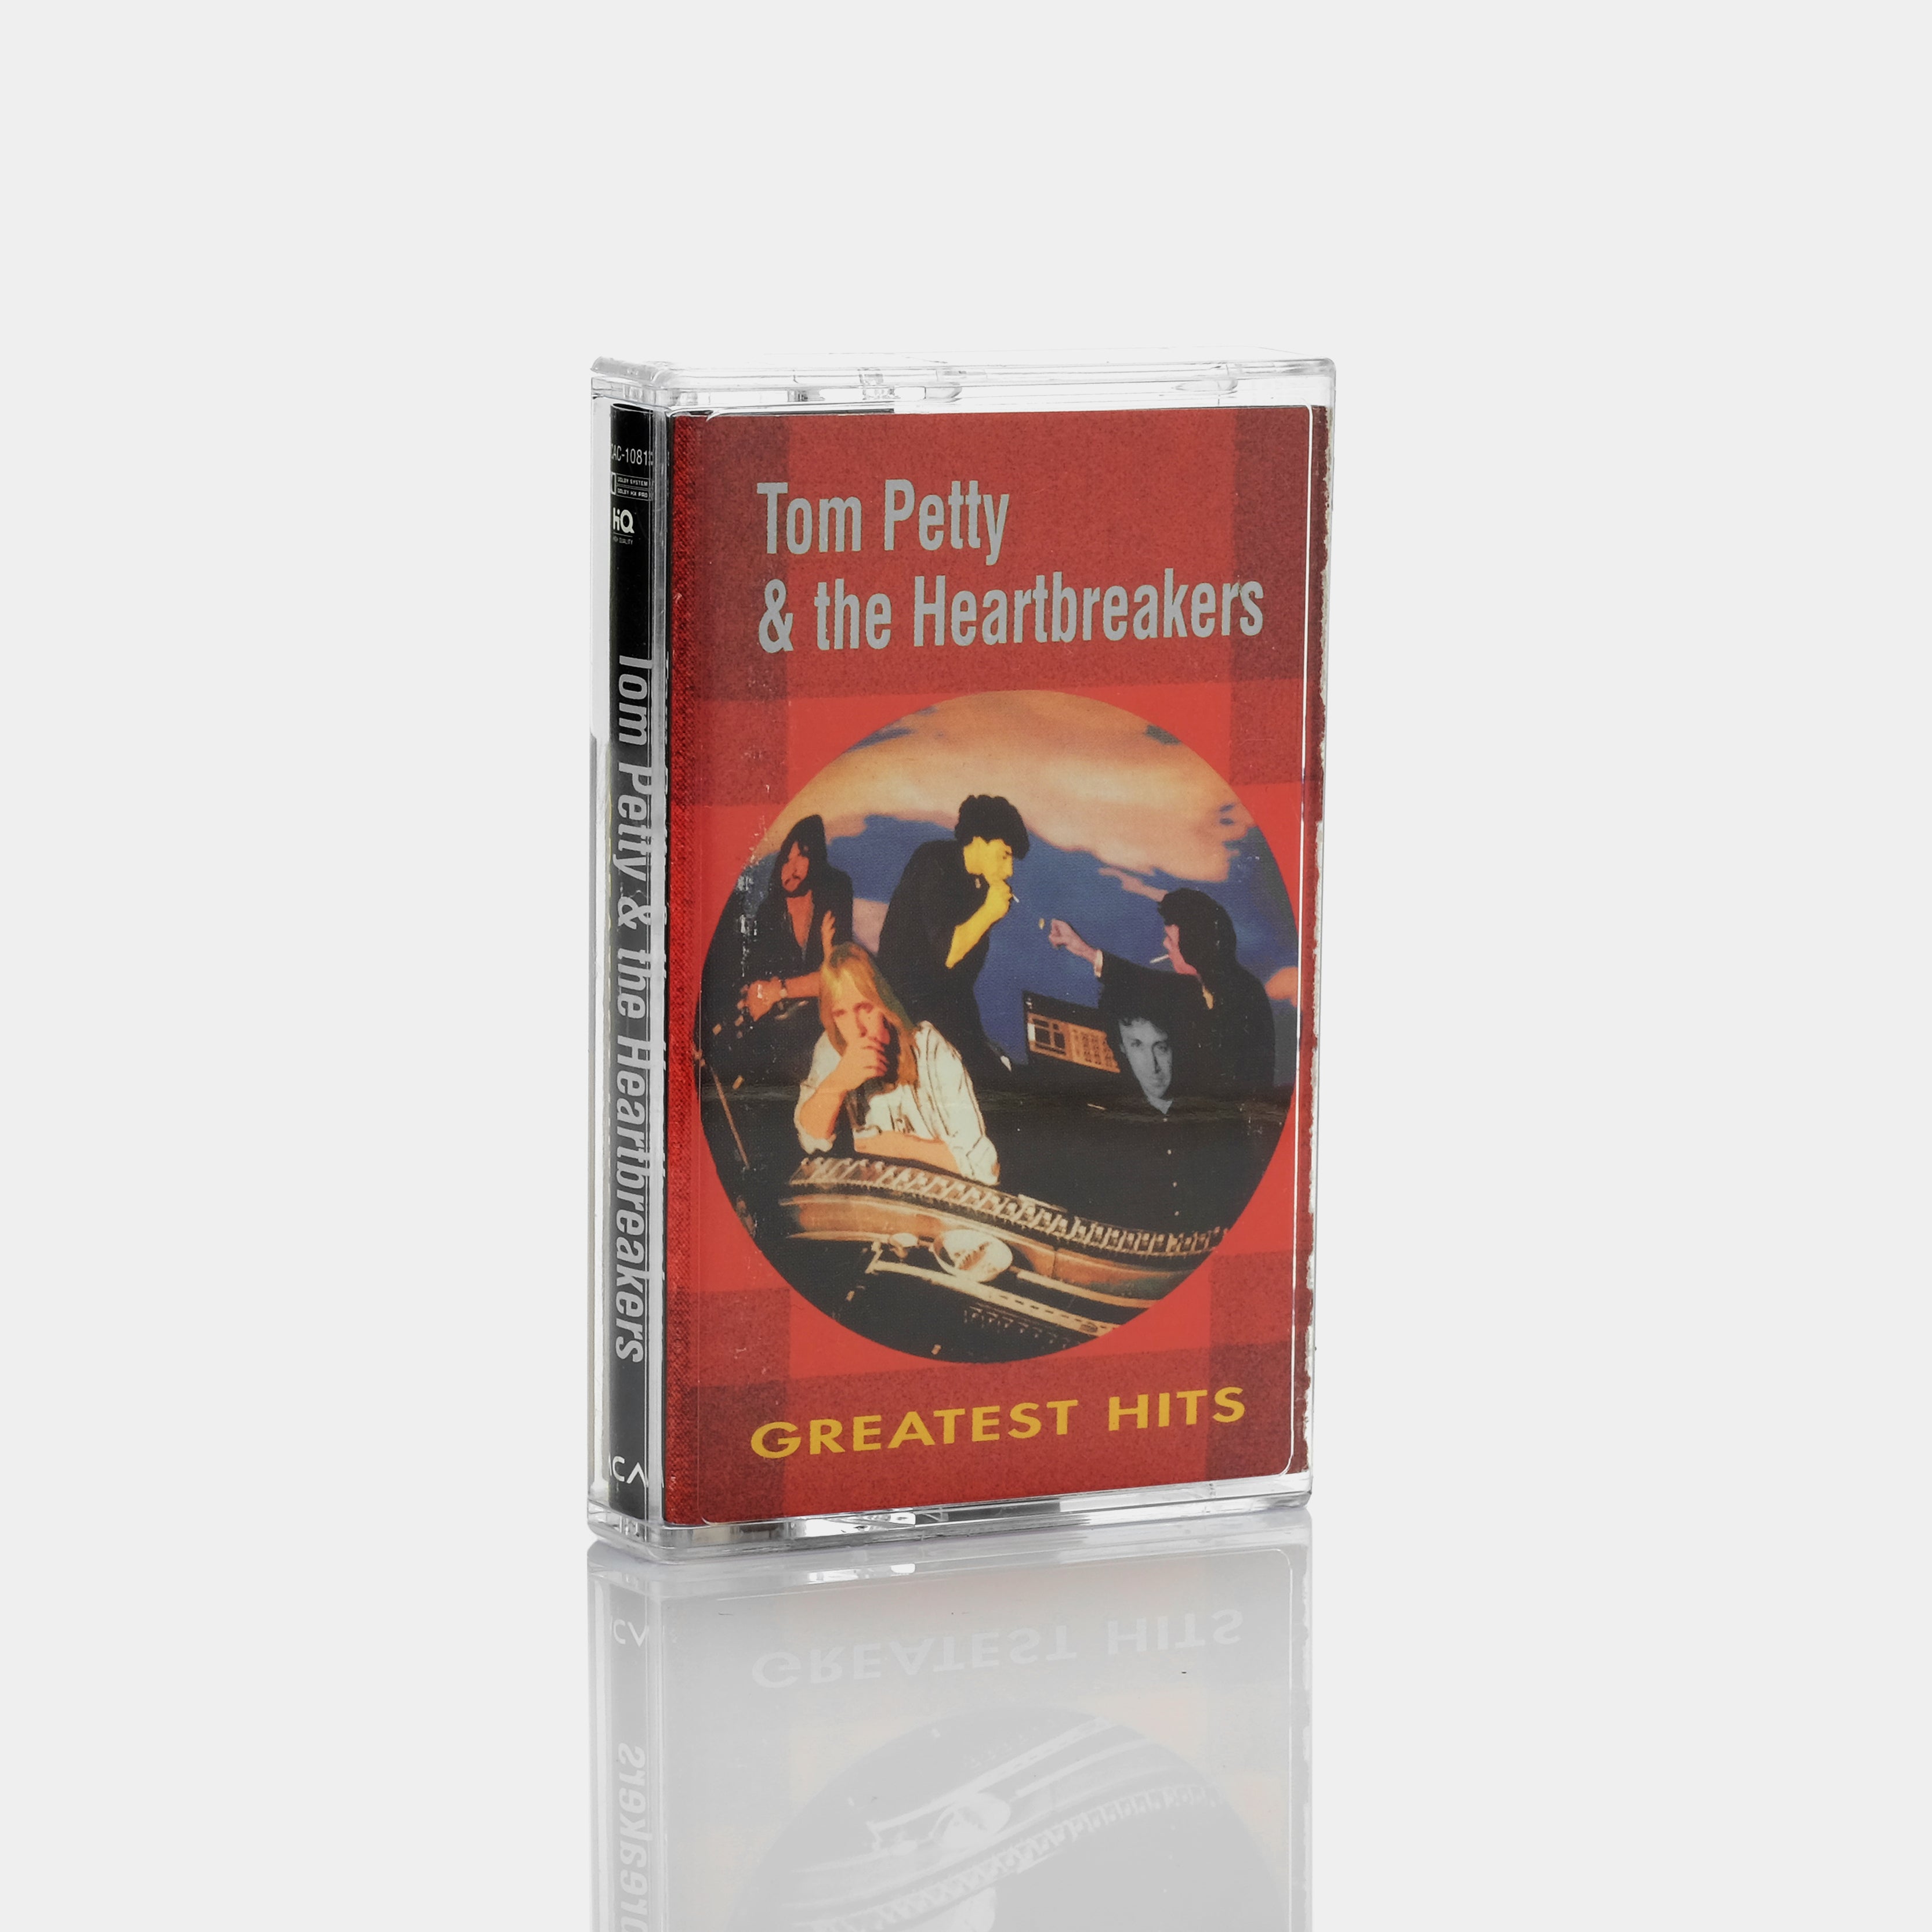 Tom Petty and the Heartbreakers - Greatest Hits Cassette Tape